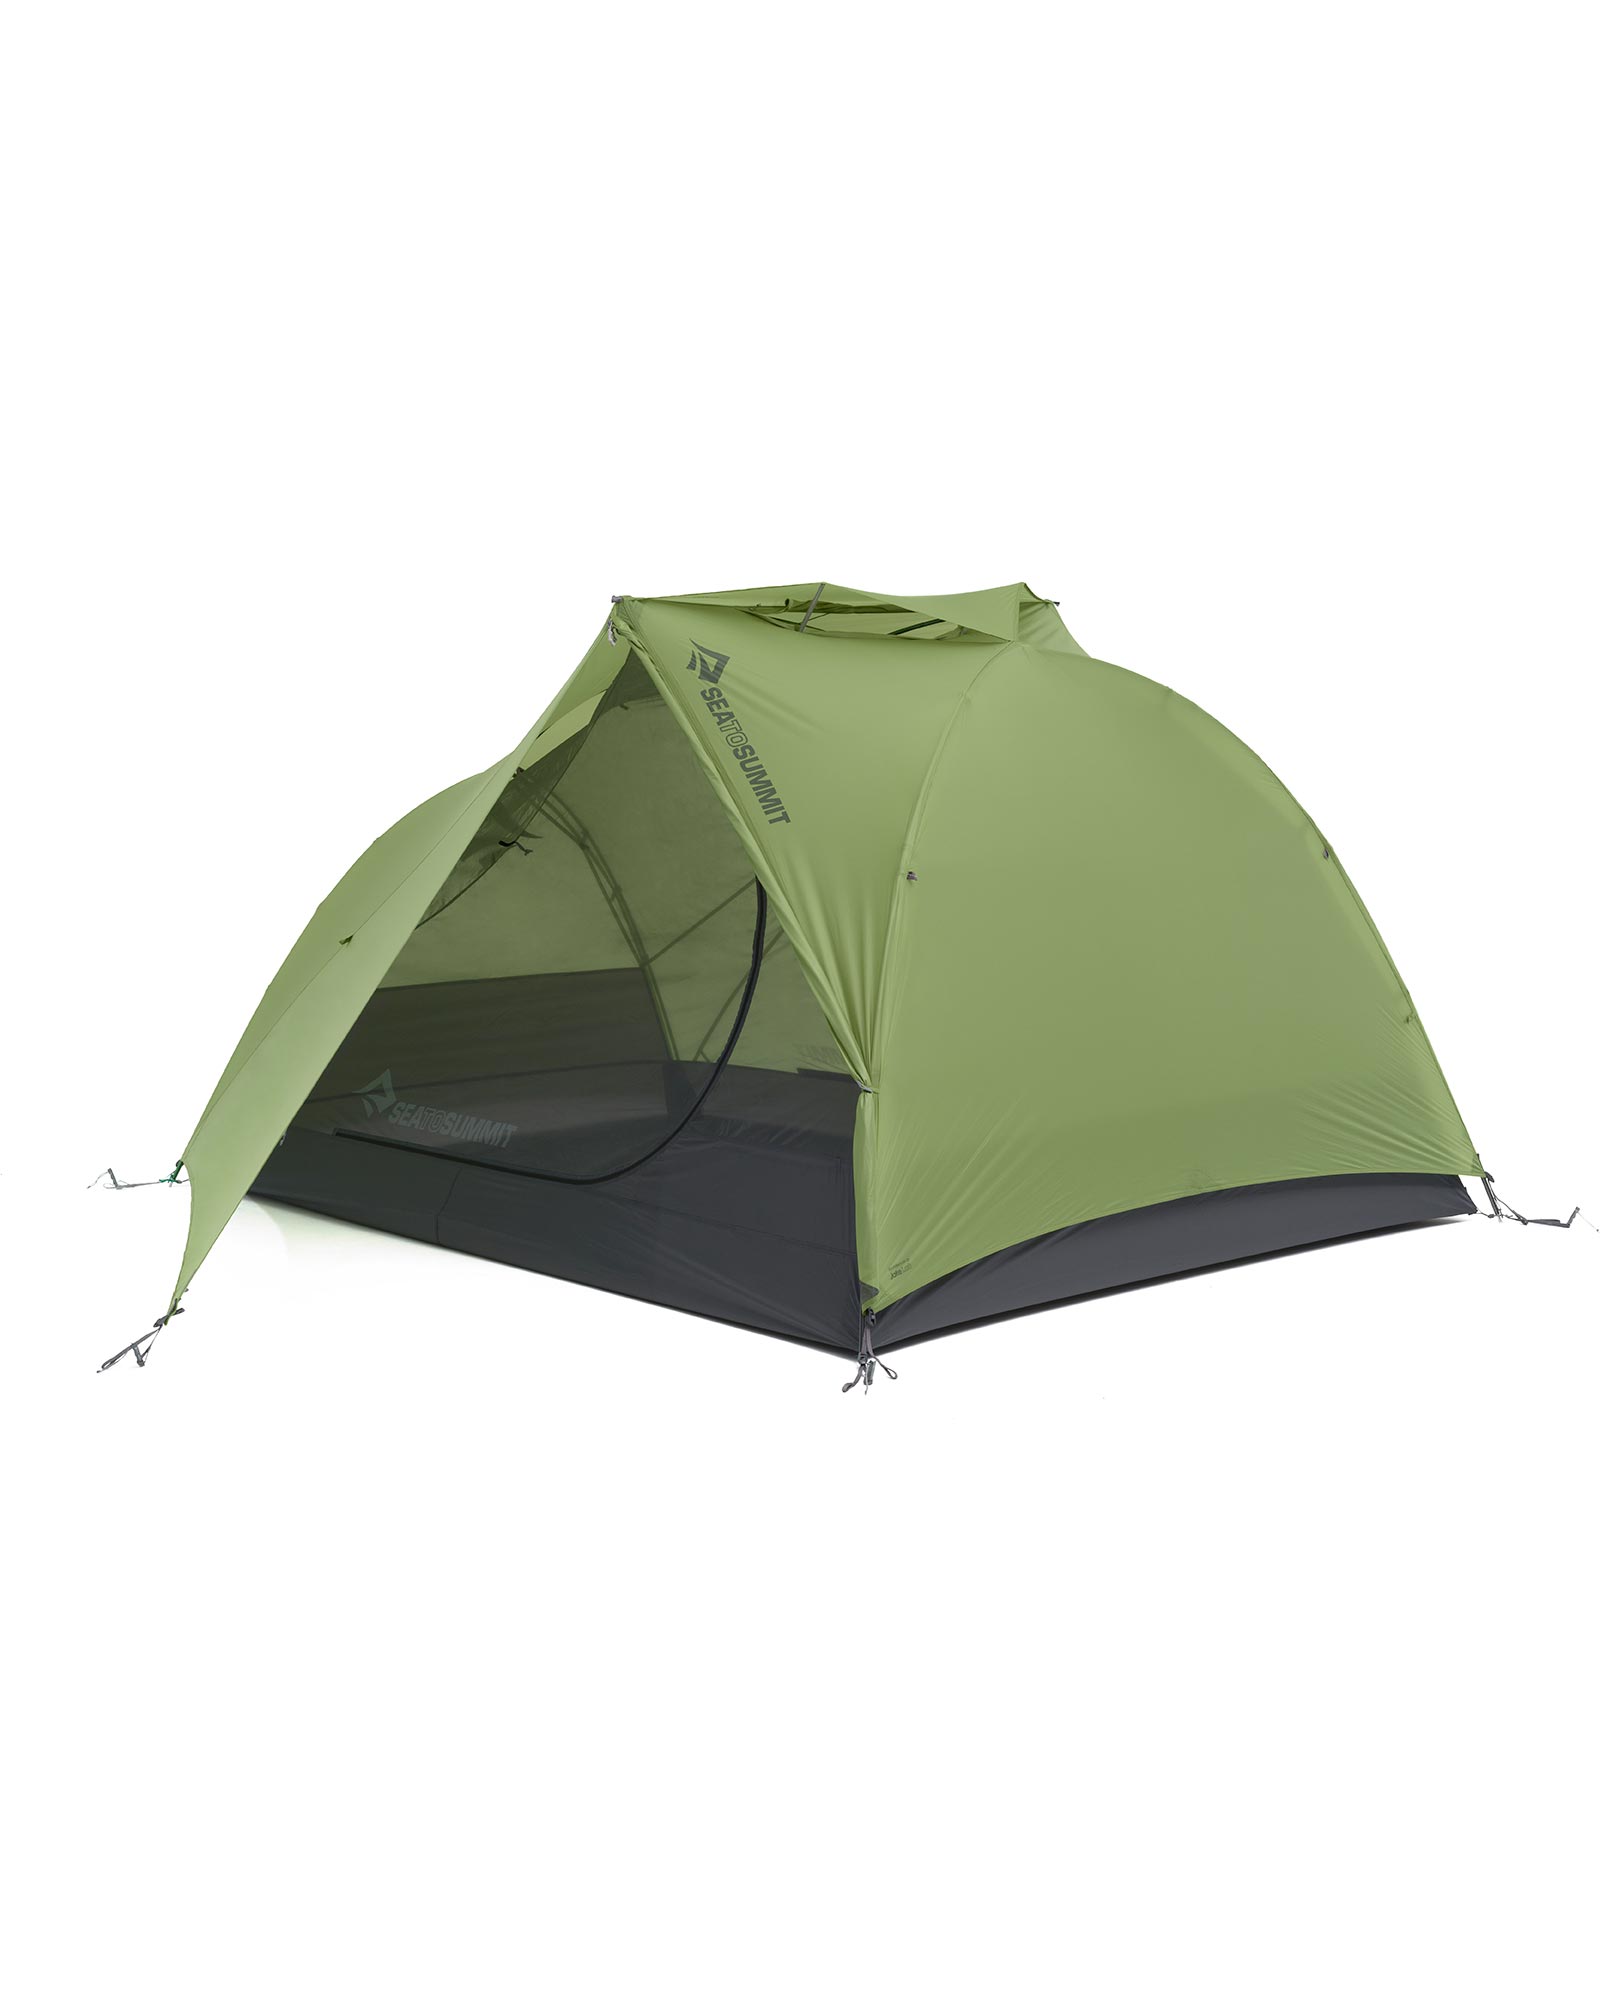 Product image of Sea to Summit Telos TR3 Tent